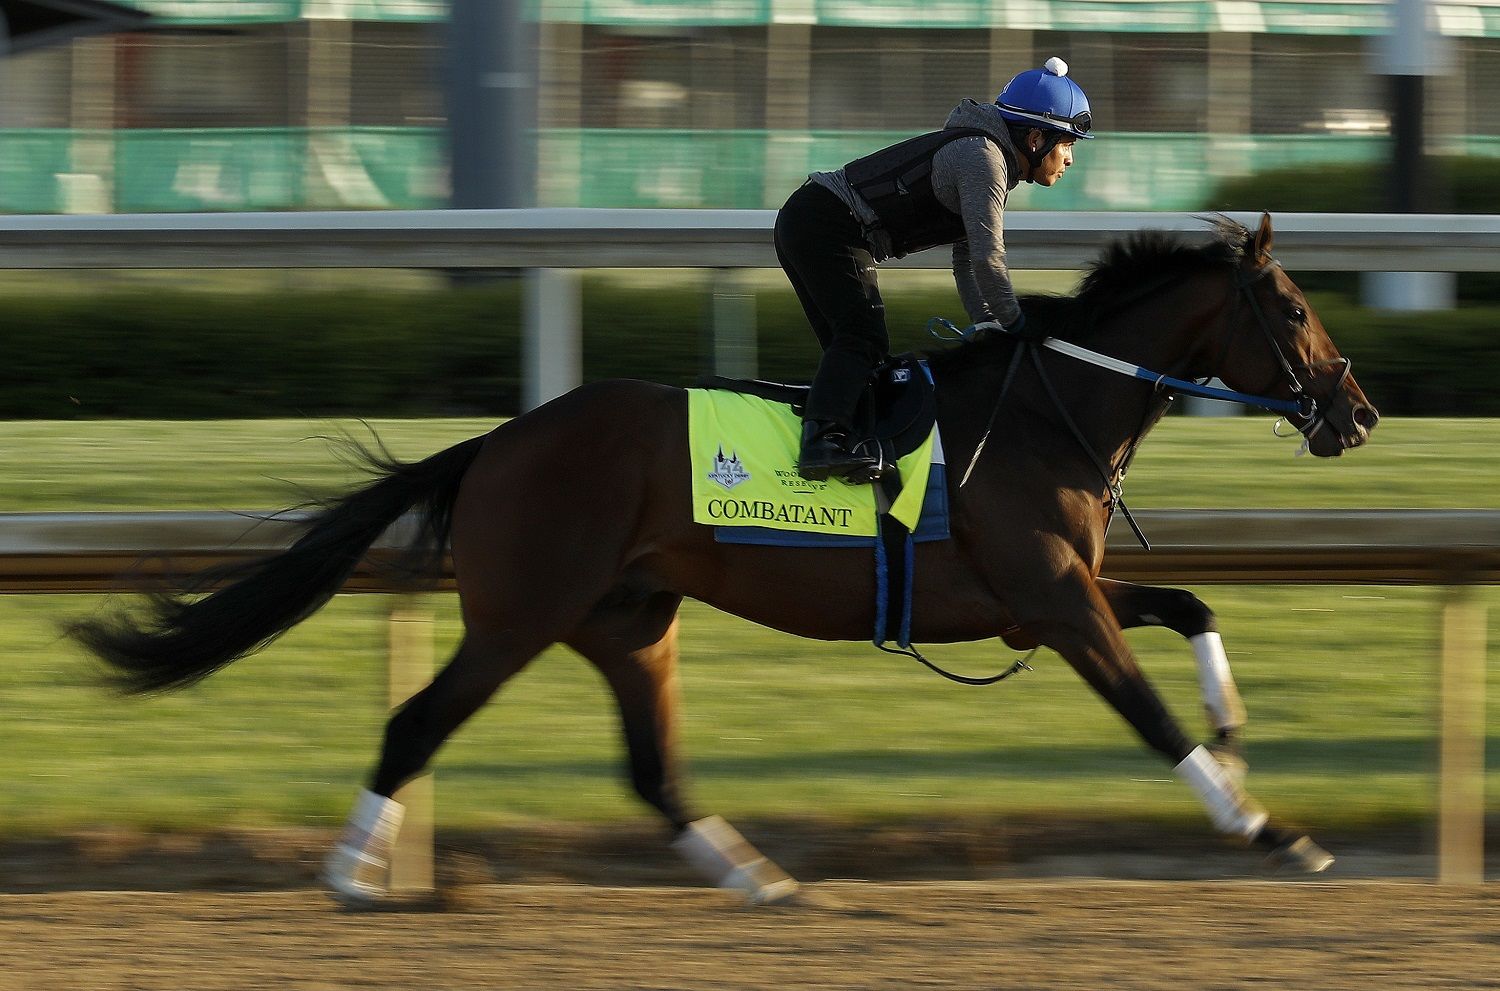 Kentucky Derby hopeful Combatant trains at Churchill Downs Monday, April 30, 2018, in Louisville, Ky. The 144th running of the Kentucky Derby is scheduled for Saturday, May 5. (AP Photo/Charlie Riedel)